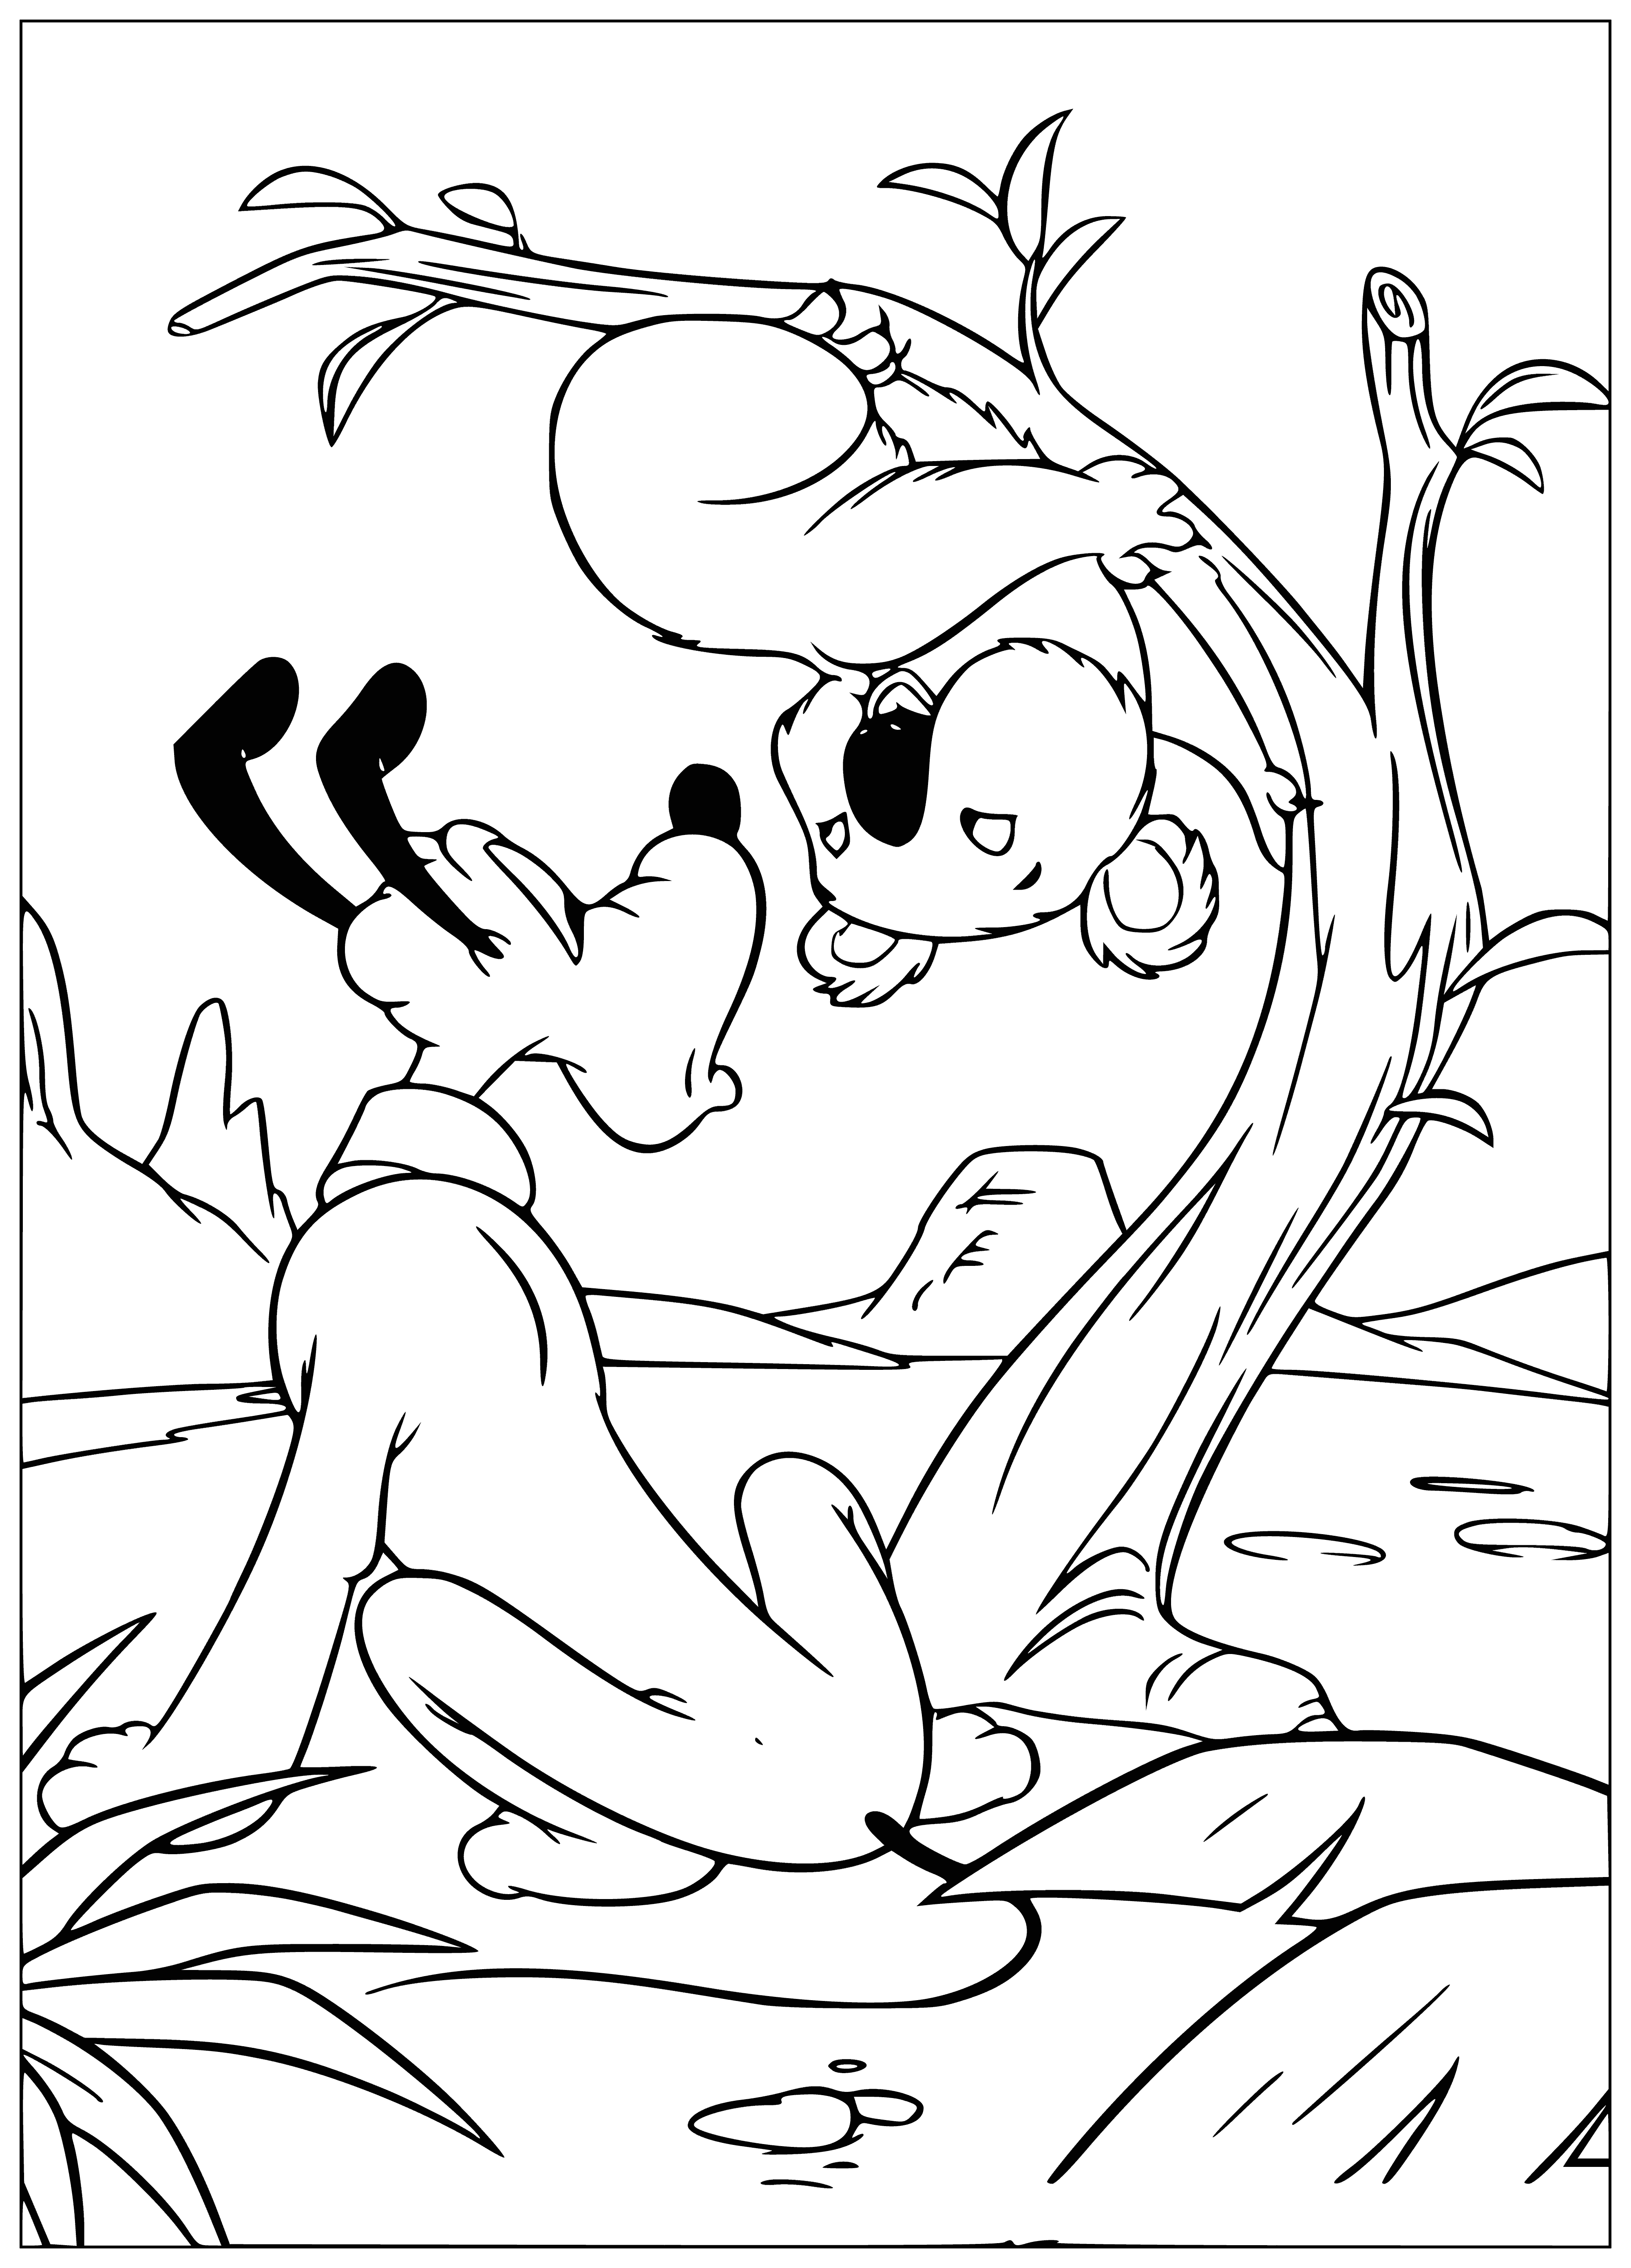 coloring page: Four friends—Mickey, Donald, Goofy, and Pluto—hugging a koala. All looking happy! #friendship